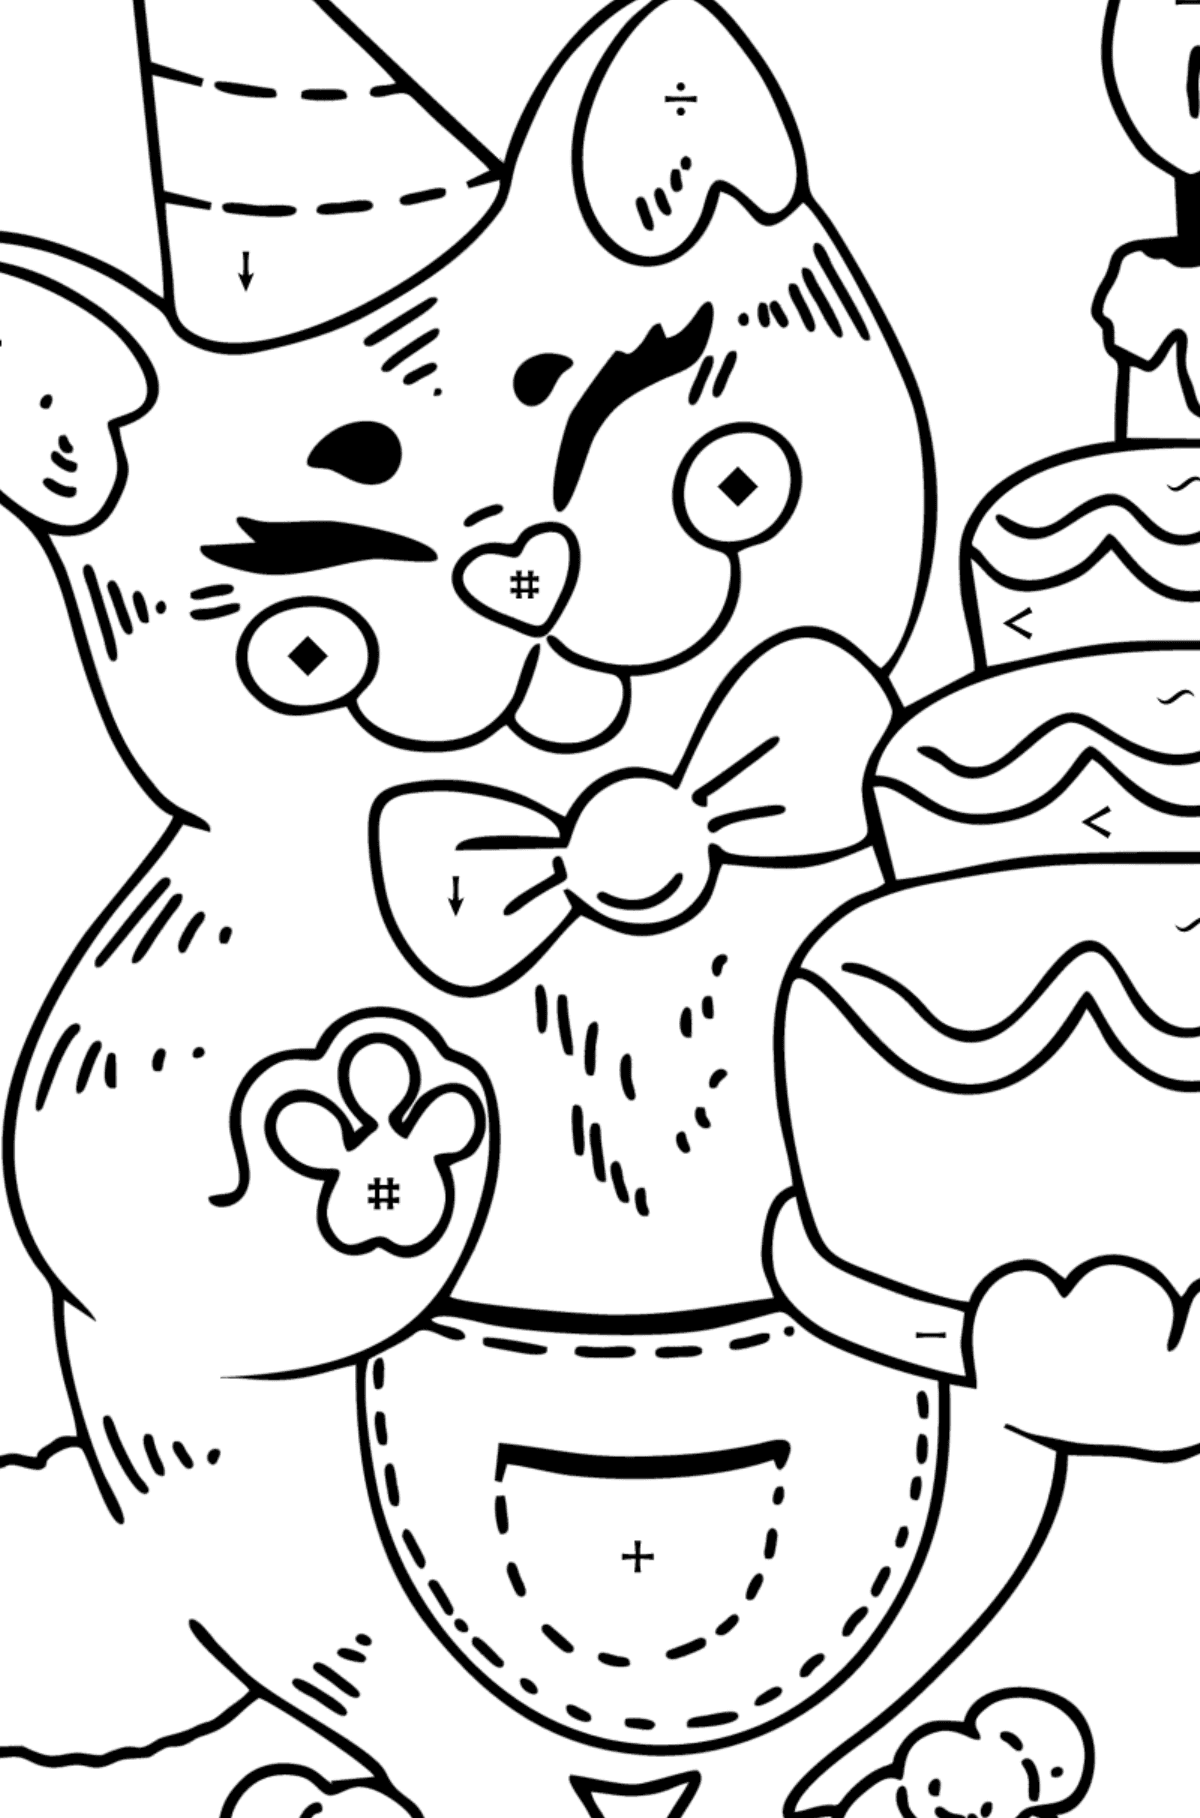 Cat Birthday coloring page - Coloring by Symbols for Kids